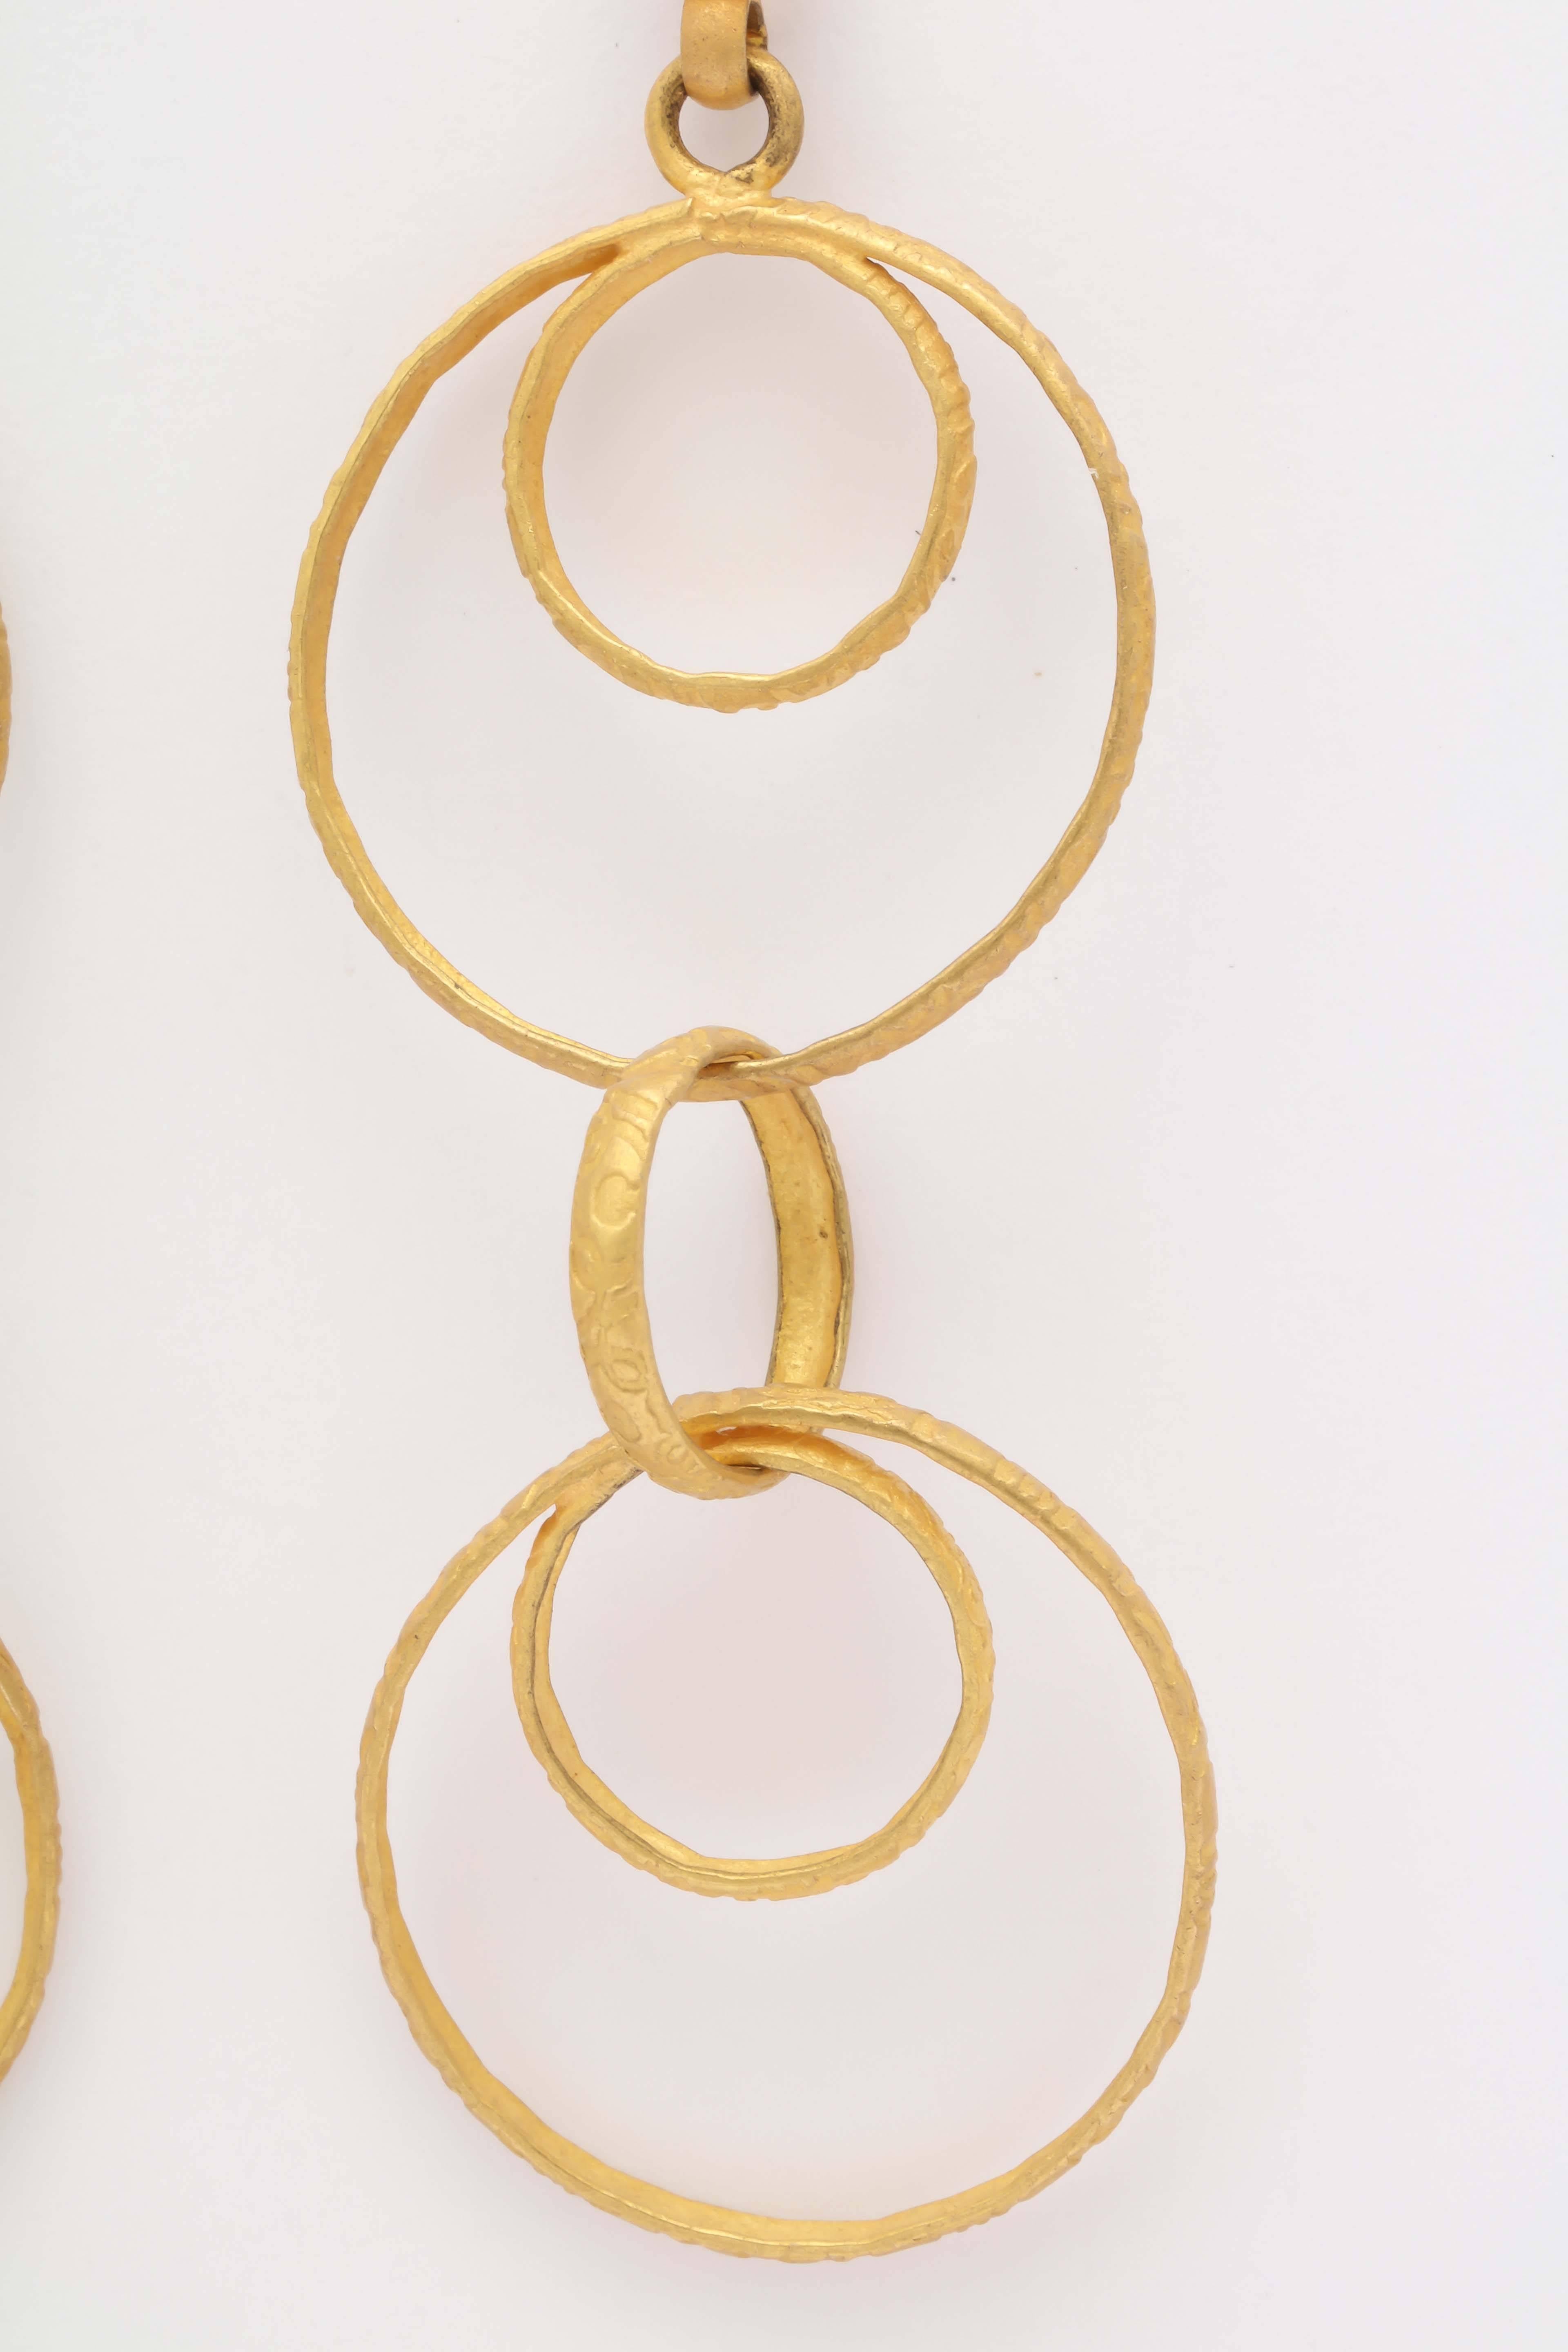 Light yet rich looking 22 kt  multihoop earrings. The long fish hook ear wires are very secure. The interlocking hoops make the earrings dangle and rotate beautifully. These earrings bring out the gypsy in you!